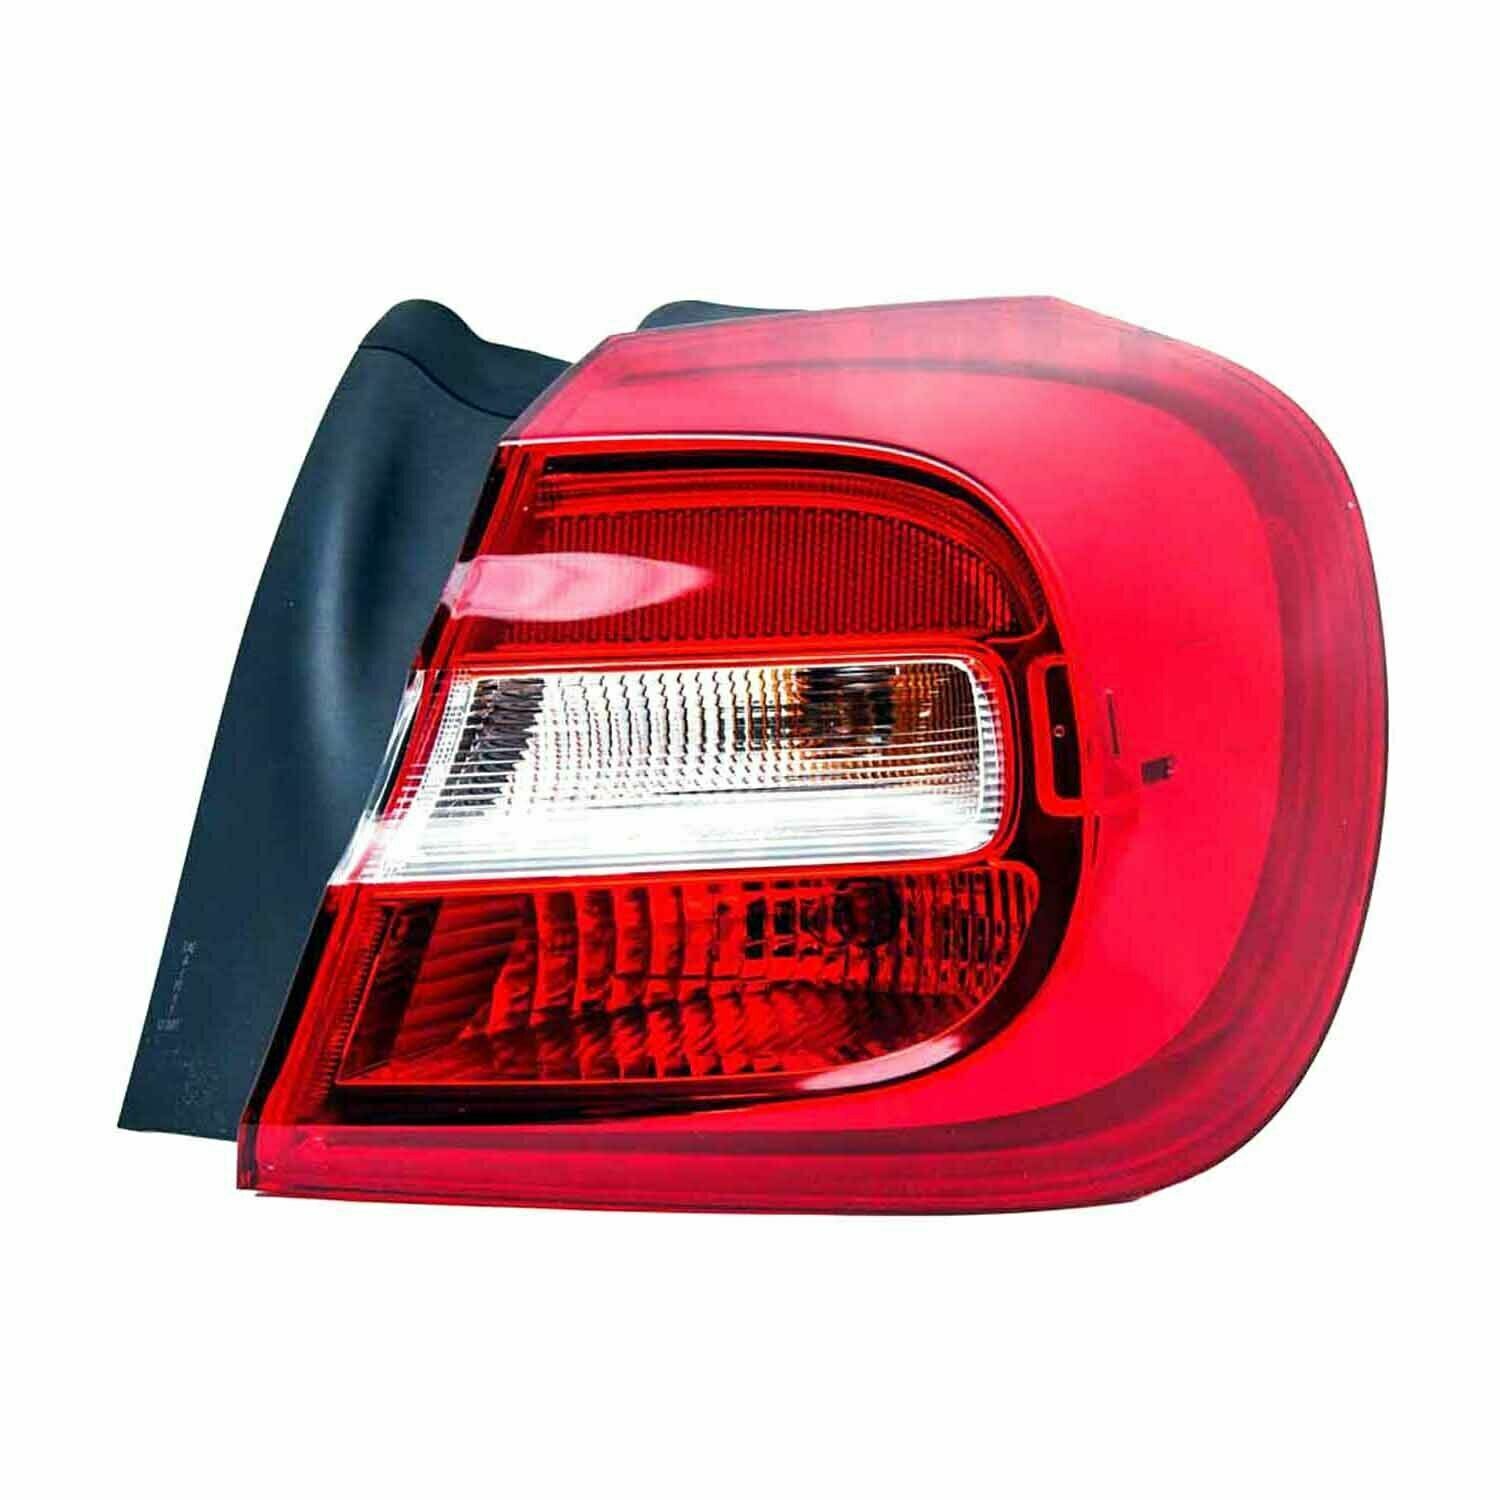 FIT FOR GLA250 / GLA45 AMG 2015 2016 2017 2018 2019 TAIL LAMP RIGHT PASSENGER